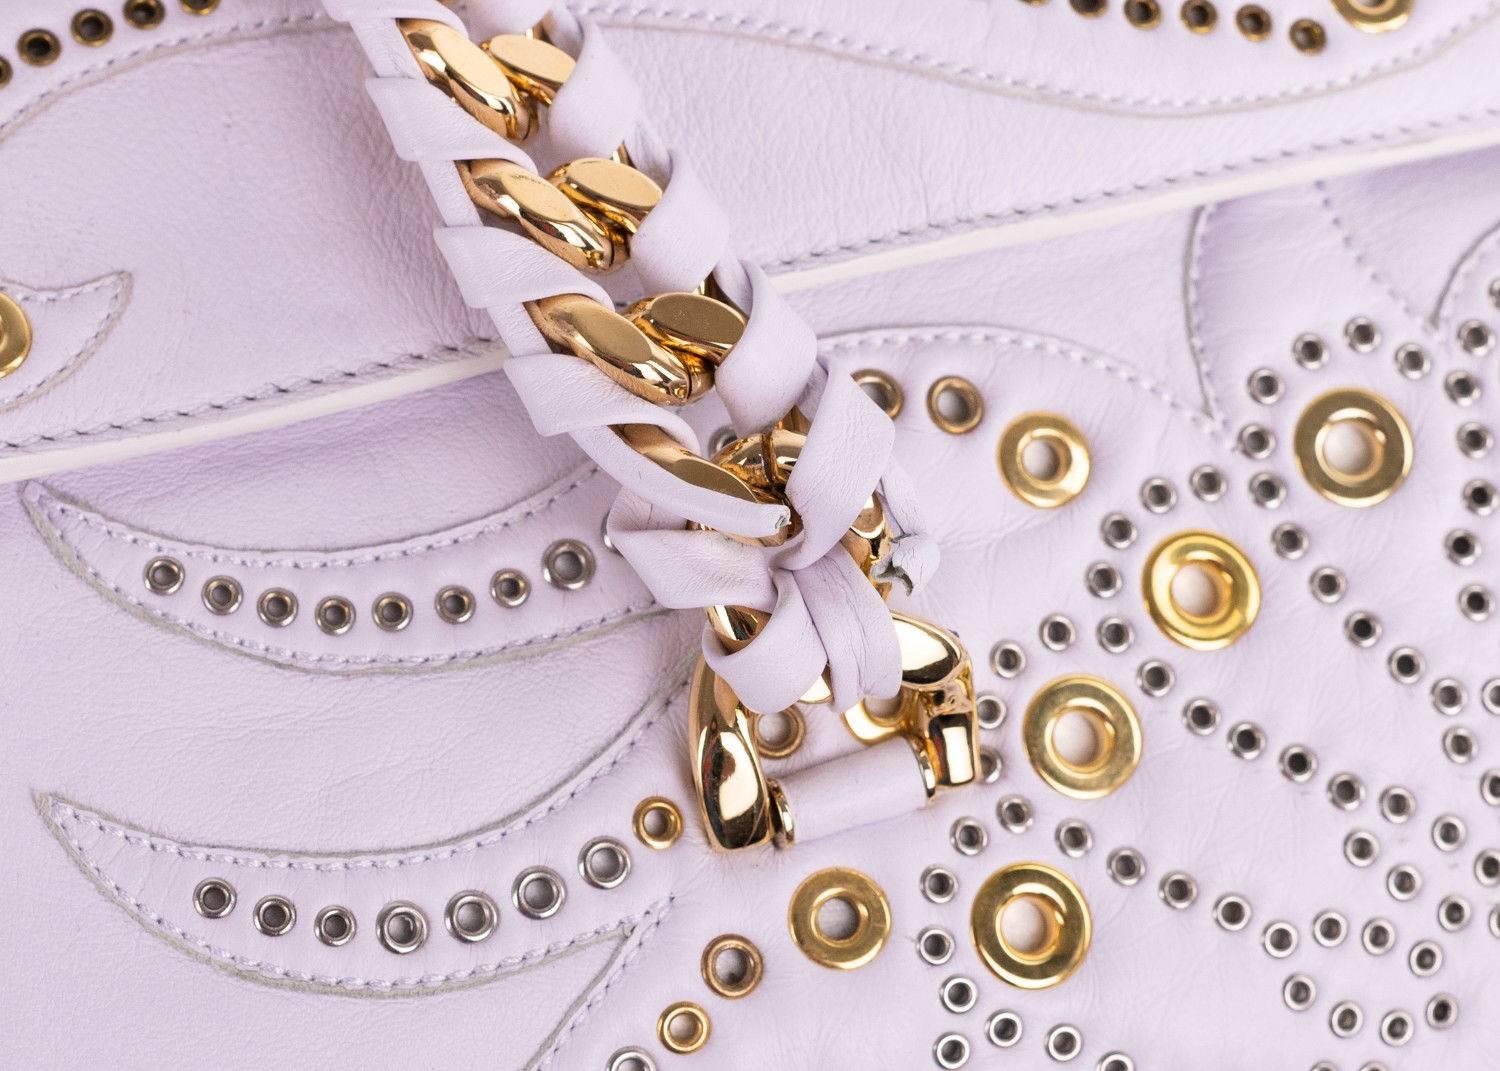 Regina Medium White Radiant Studded Satchel Bag crafted in lambskin leather lends a boho chic style with its soft lines and radiant pyramid and pindot studs. Featuring inlaid chain and leather handles internal zip and slip pockets Leather lining and